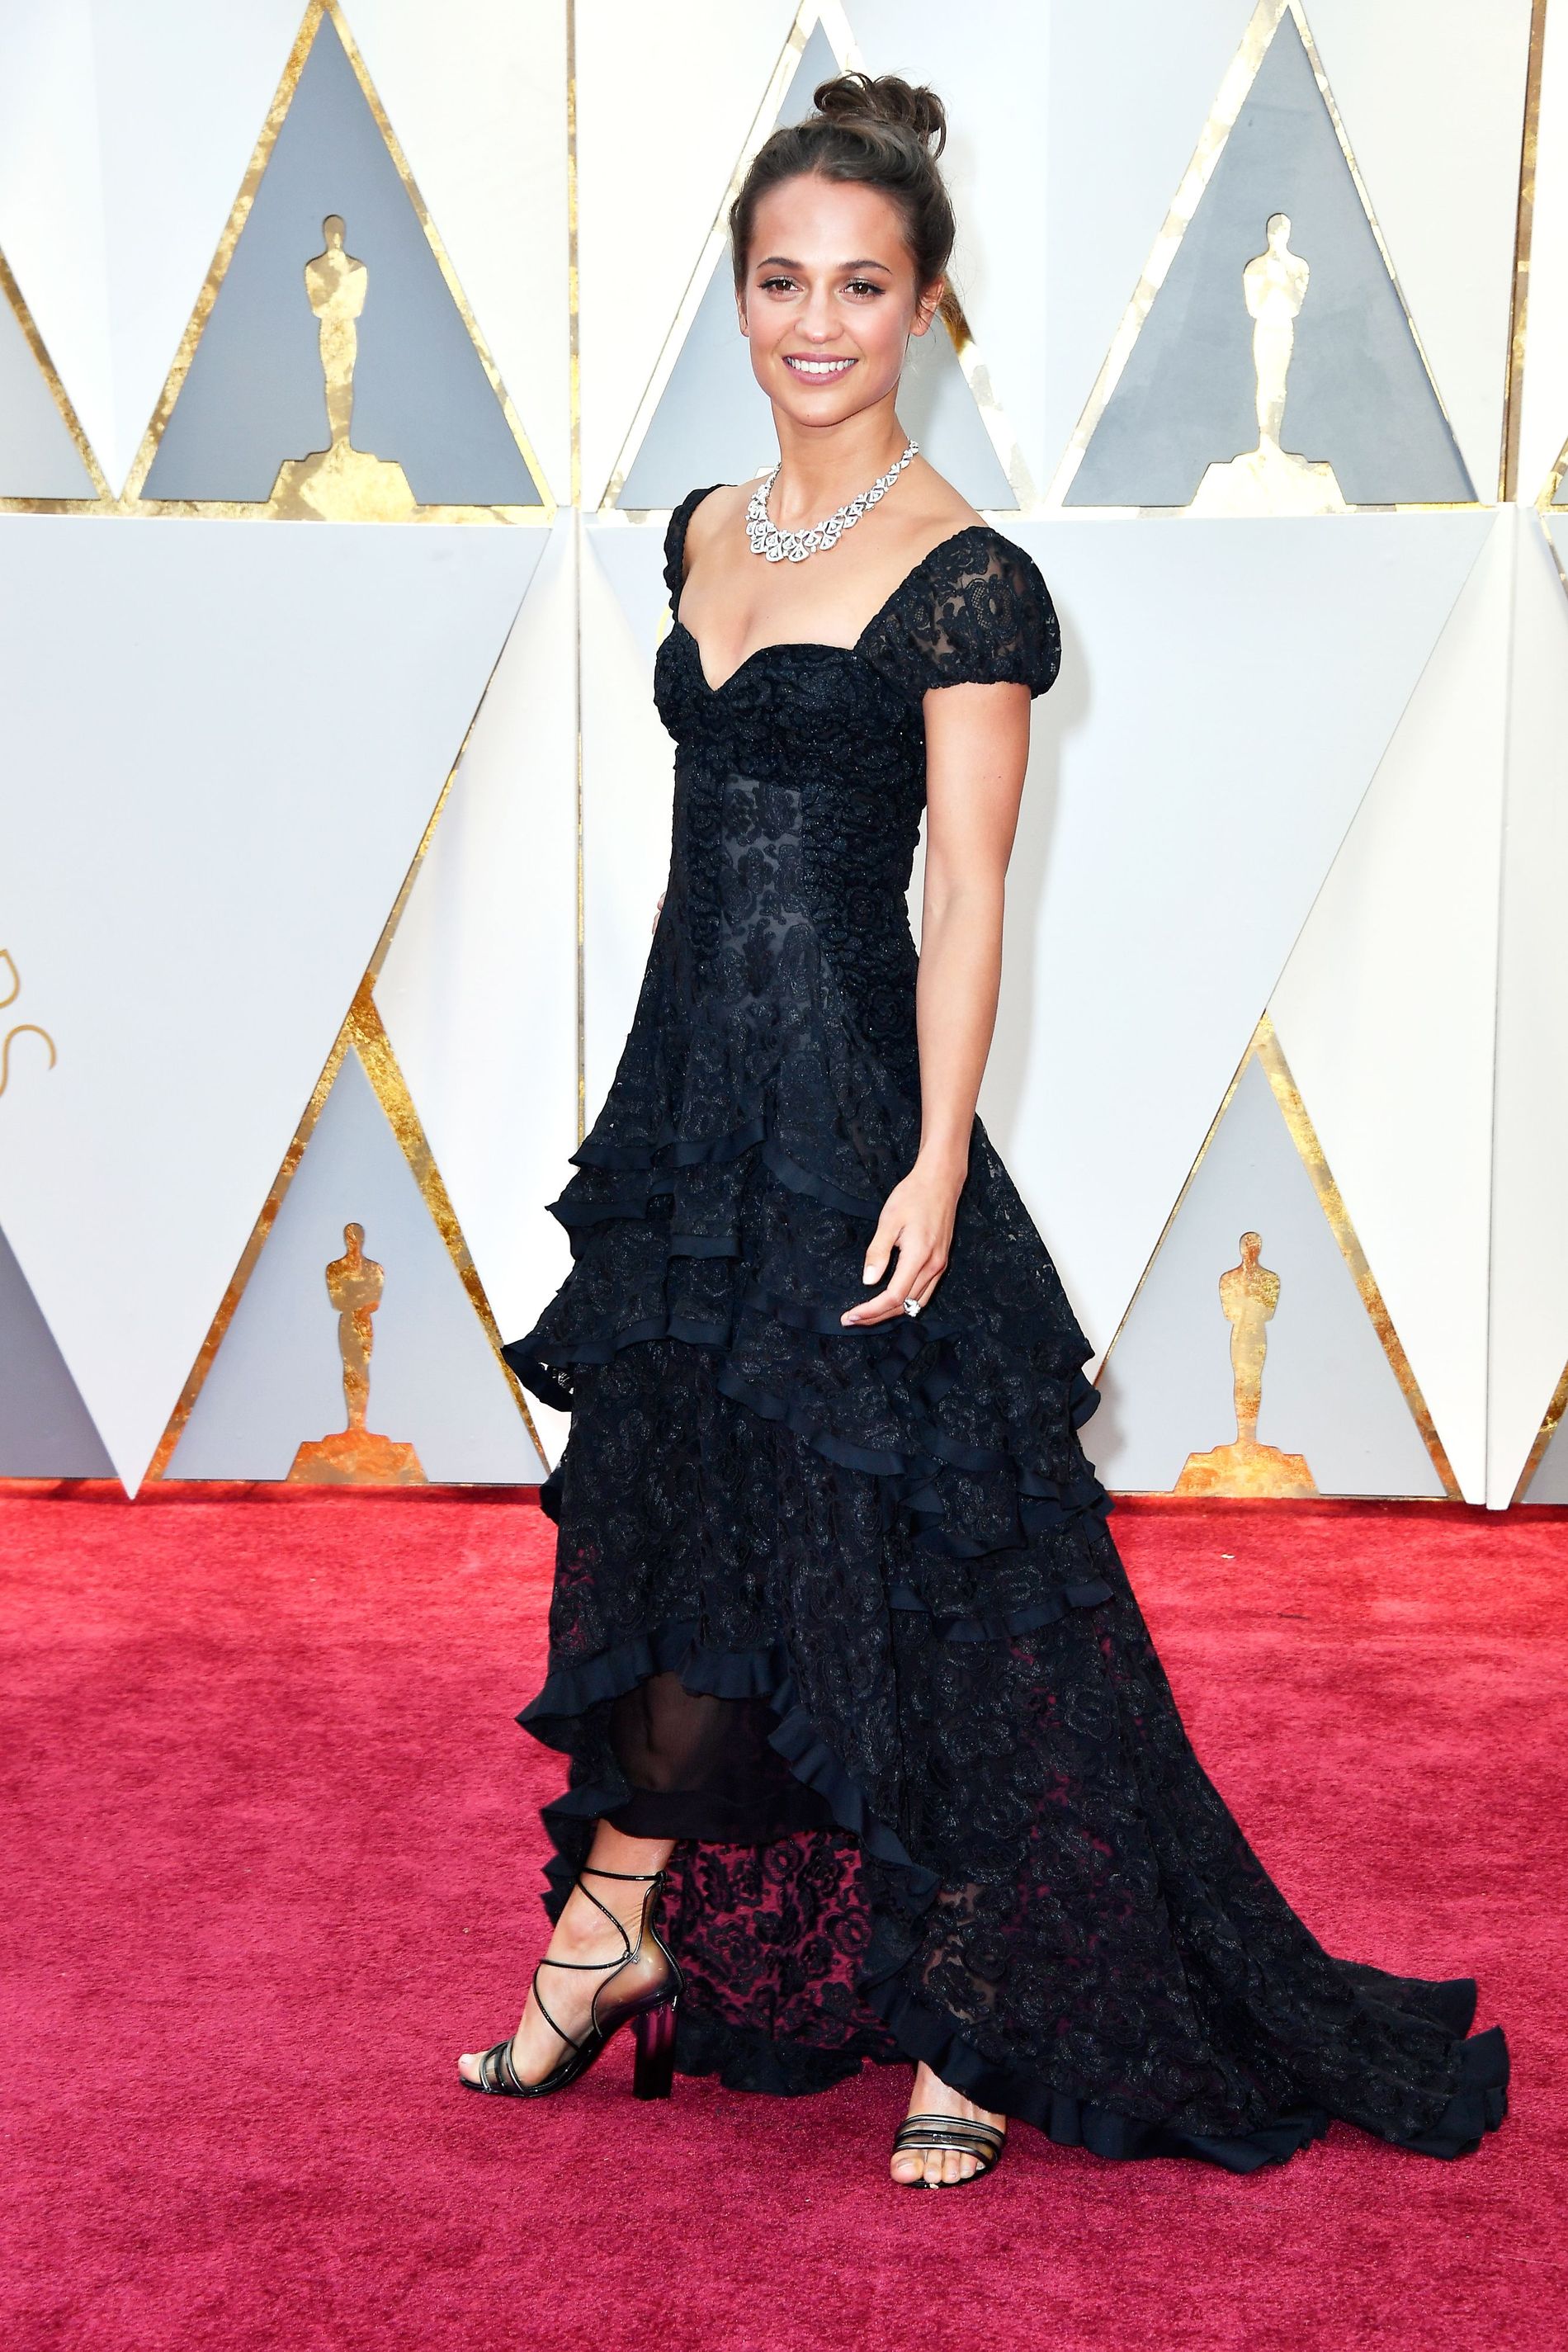 Alicia Vikander at the Oscars 2016 in Louis Vuitton